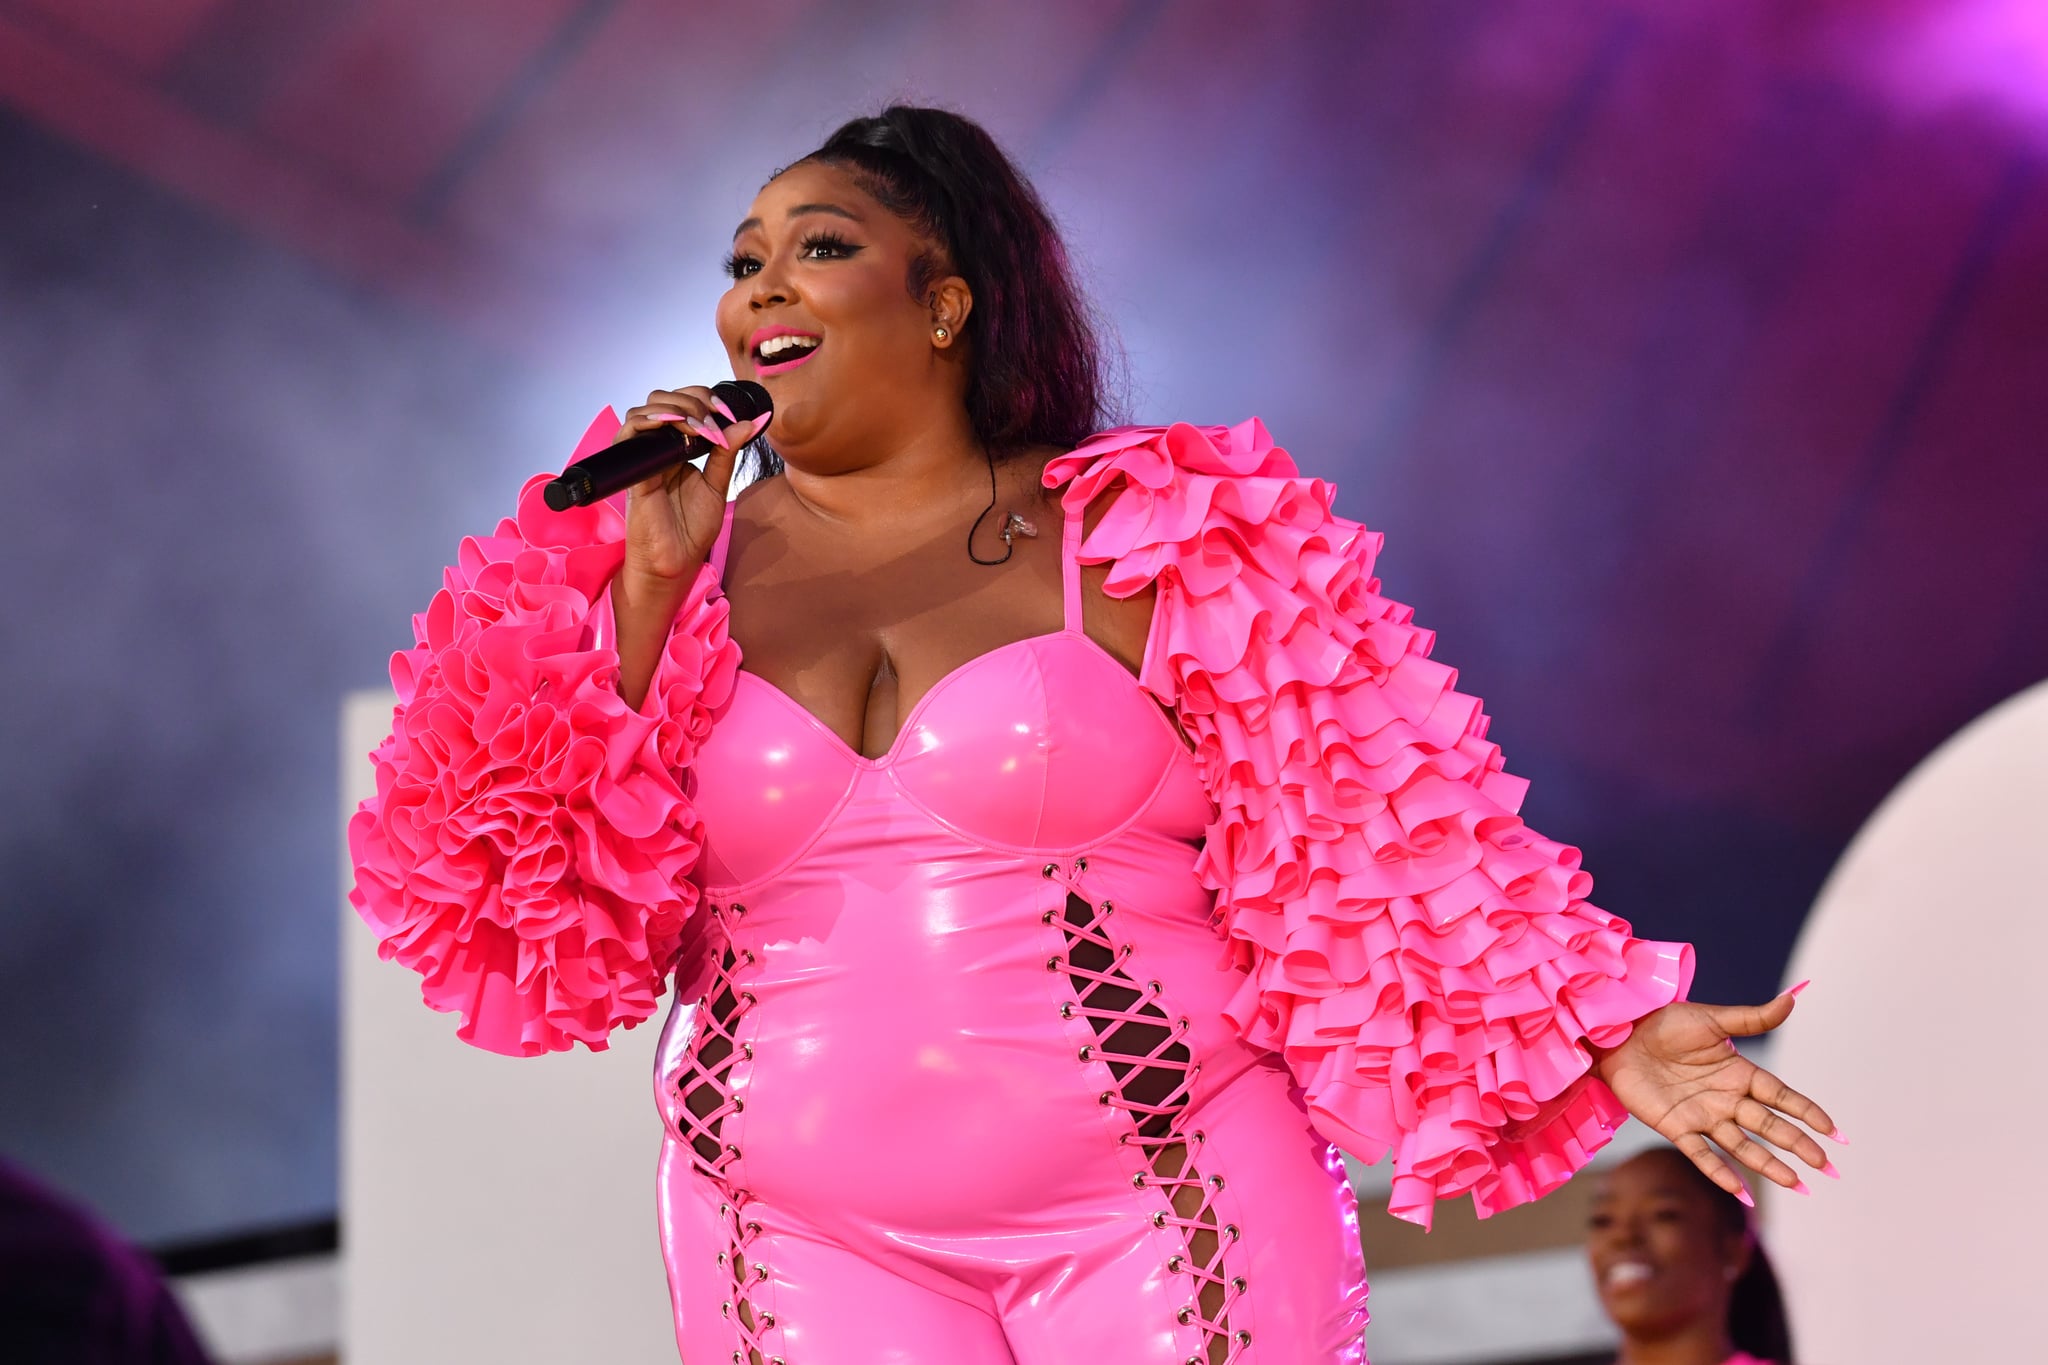 NEW YORK, NY - SEPTEMBER 25:  Lizzo at Global Citizen Live on September 25, 2021 in New York City.  (Photo by NDZ/Star Max/GC Images)